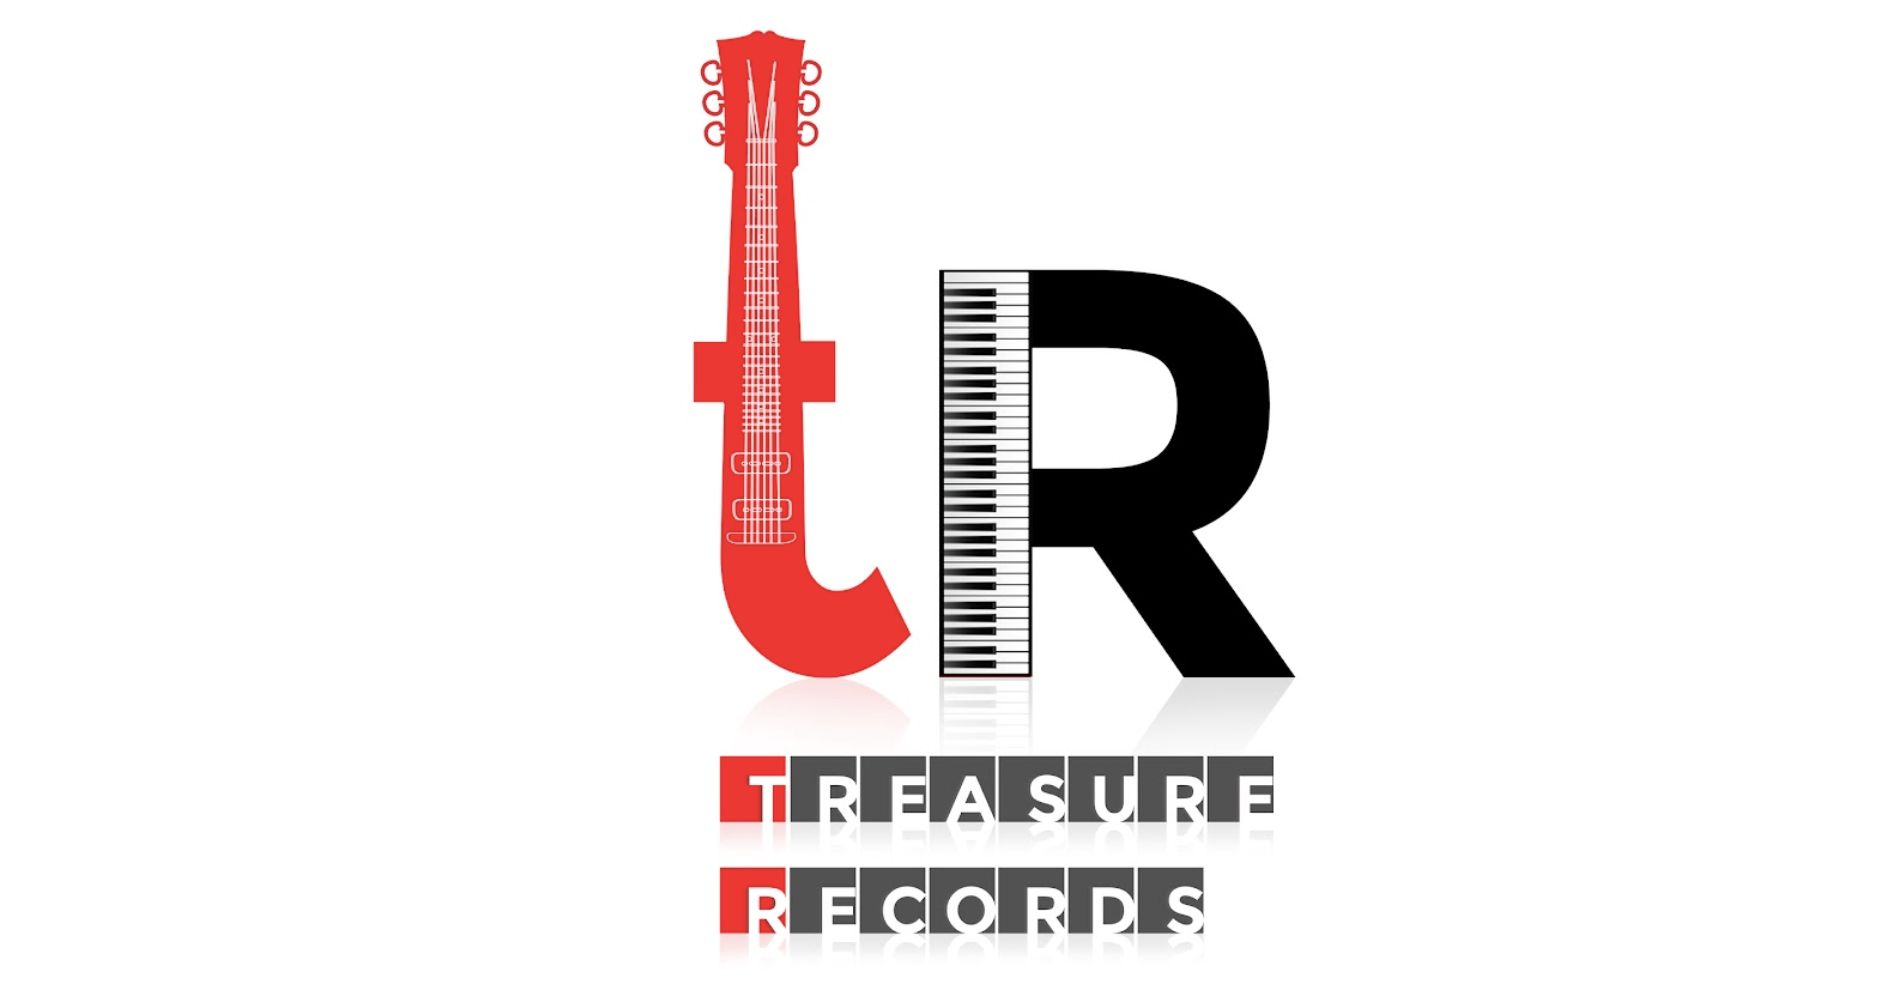 Music label company, 'Treasure Records' 2 million views on their first Music Video